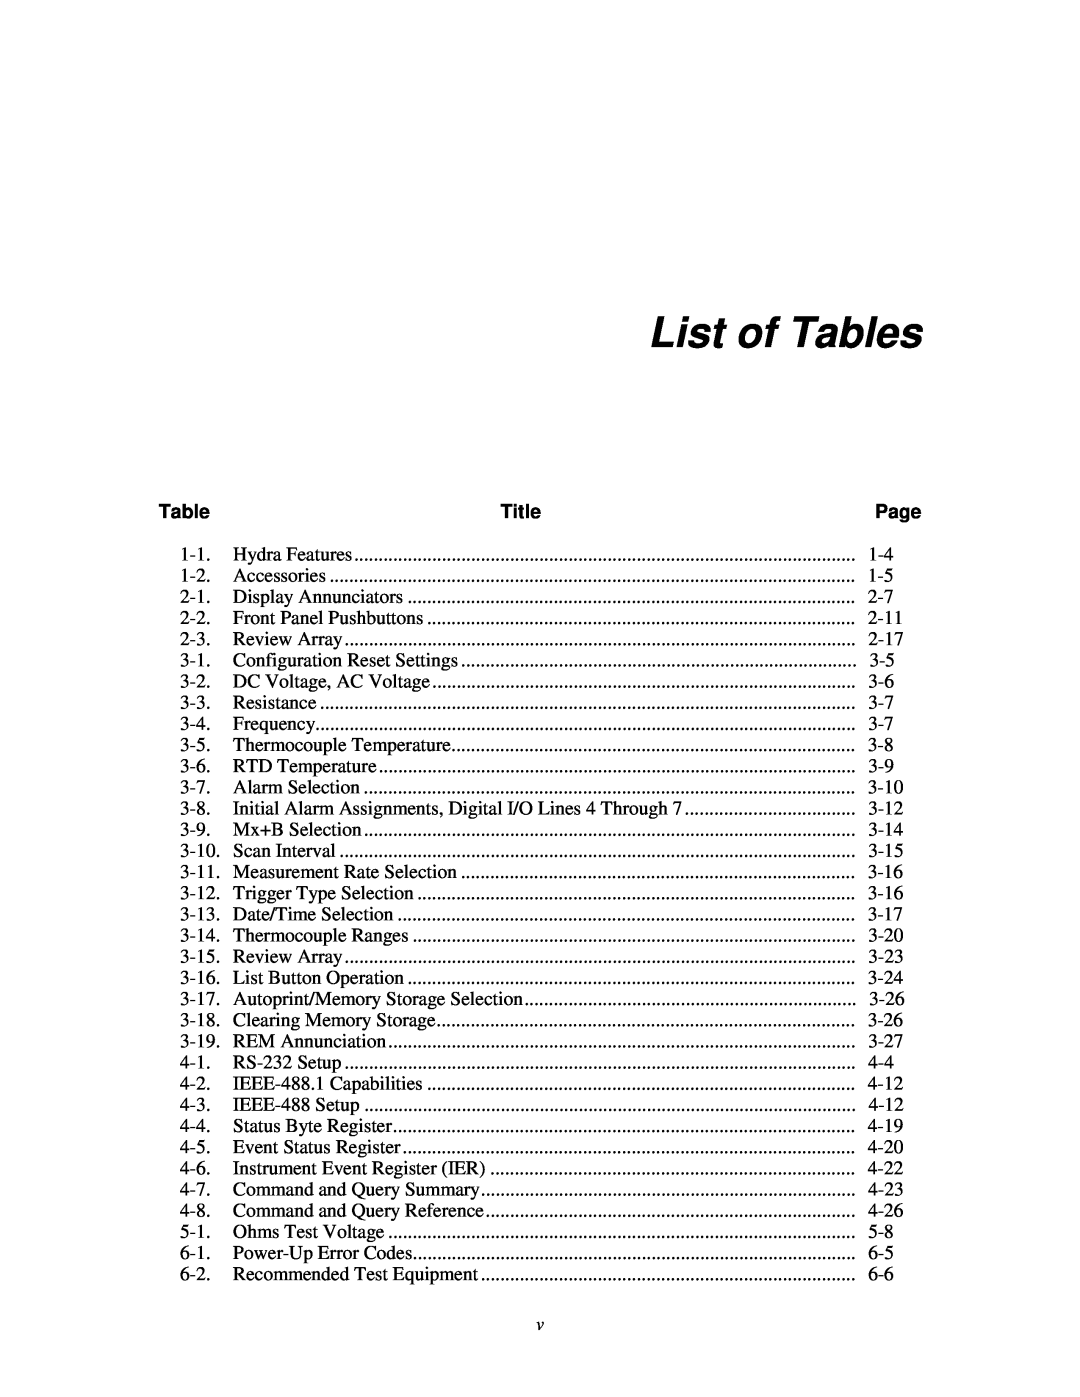 Fluke 2620A, 2625A user manual List of Tables, Title 